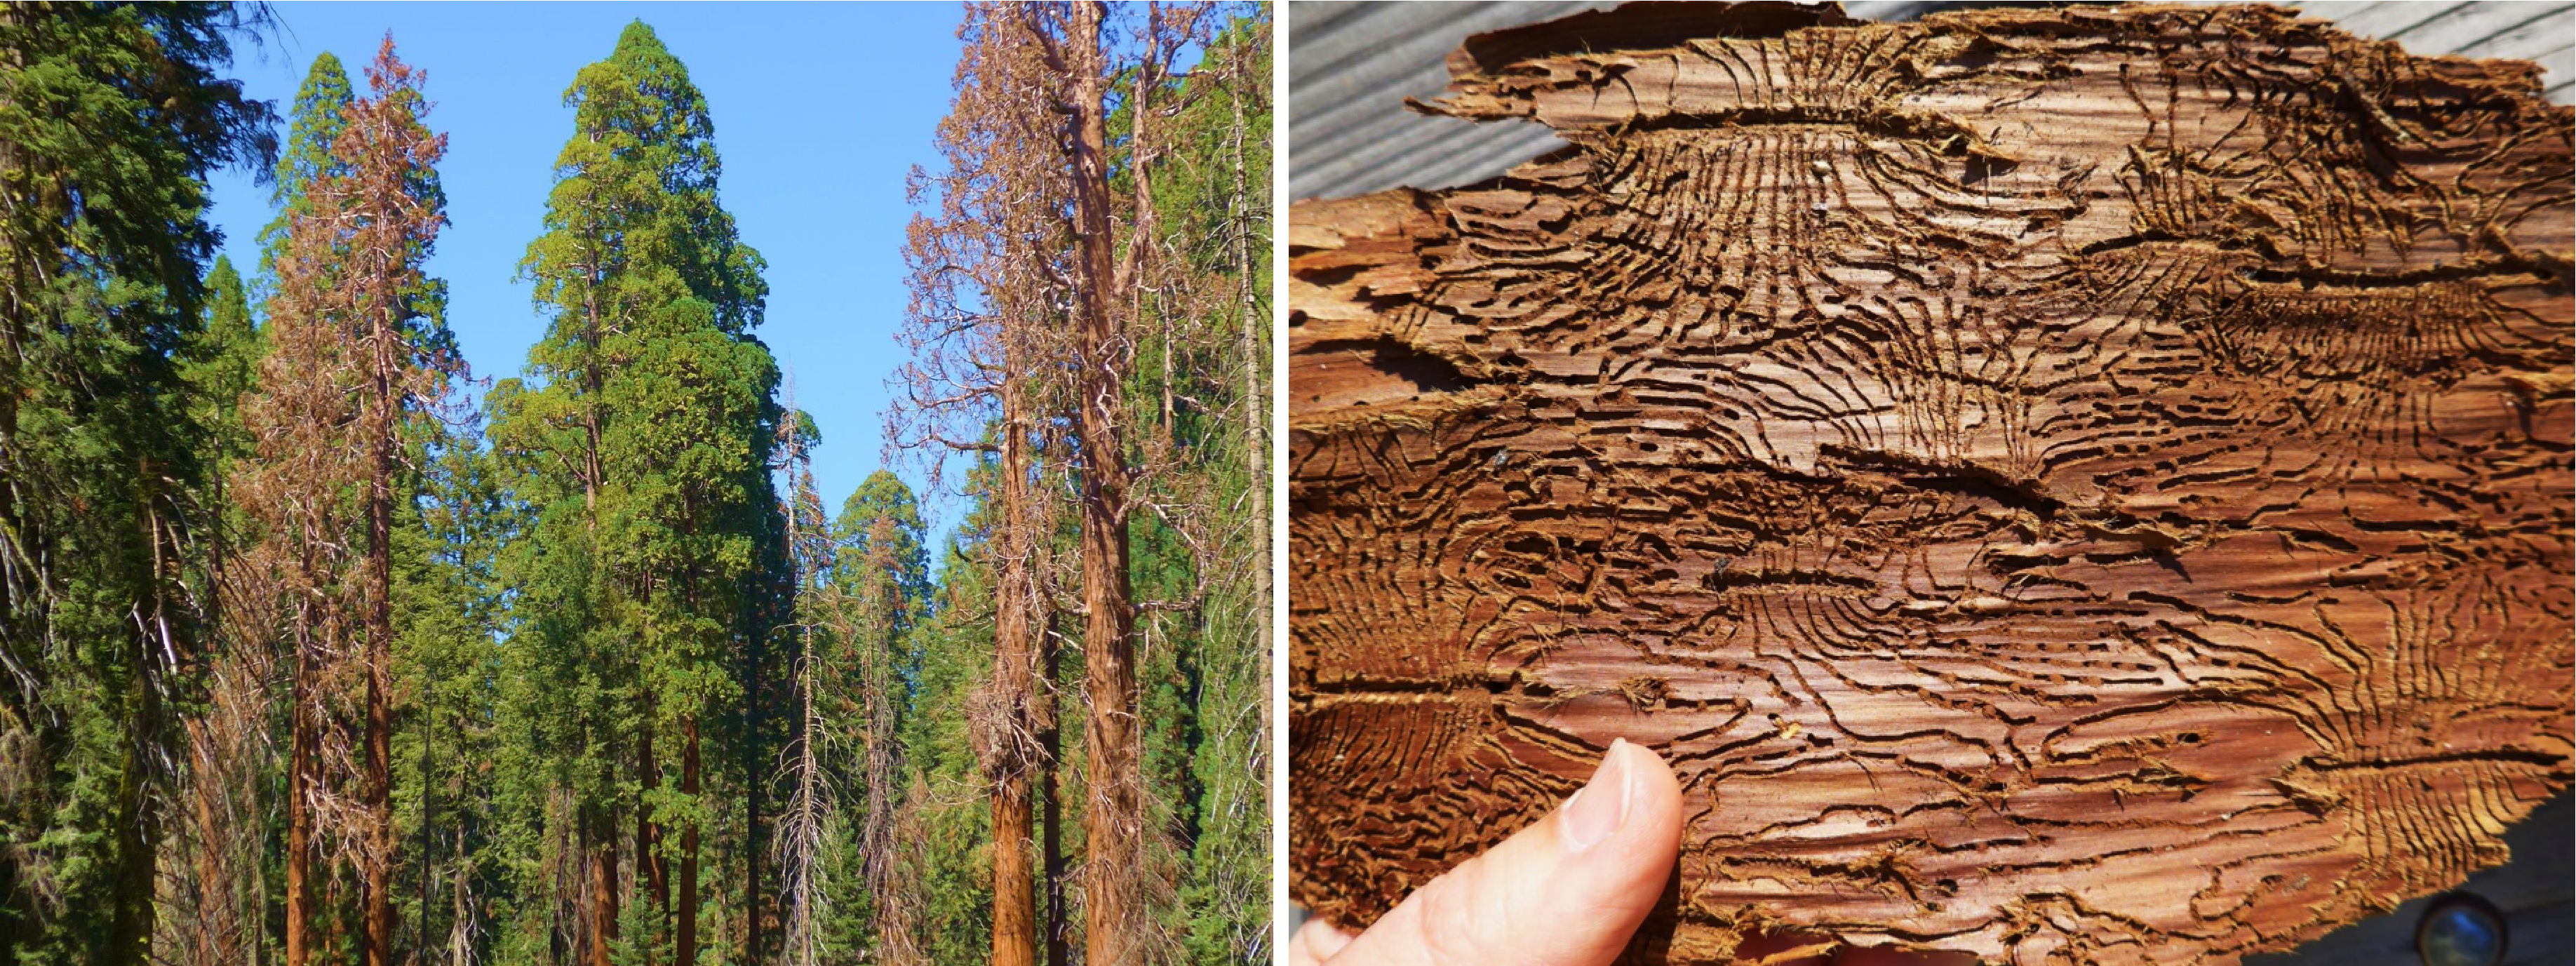 Left image: Four giant sequoias with dead, brown foliage mixed with live sequoias nearby; right image: intricate pattern of bark beetle tunnels on inner bark of giant sequoia